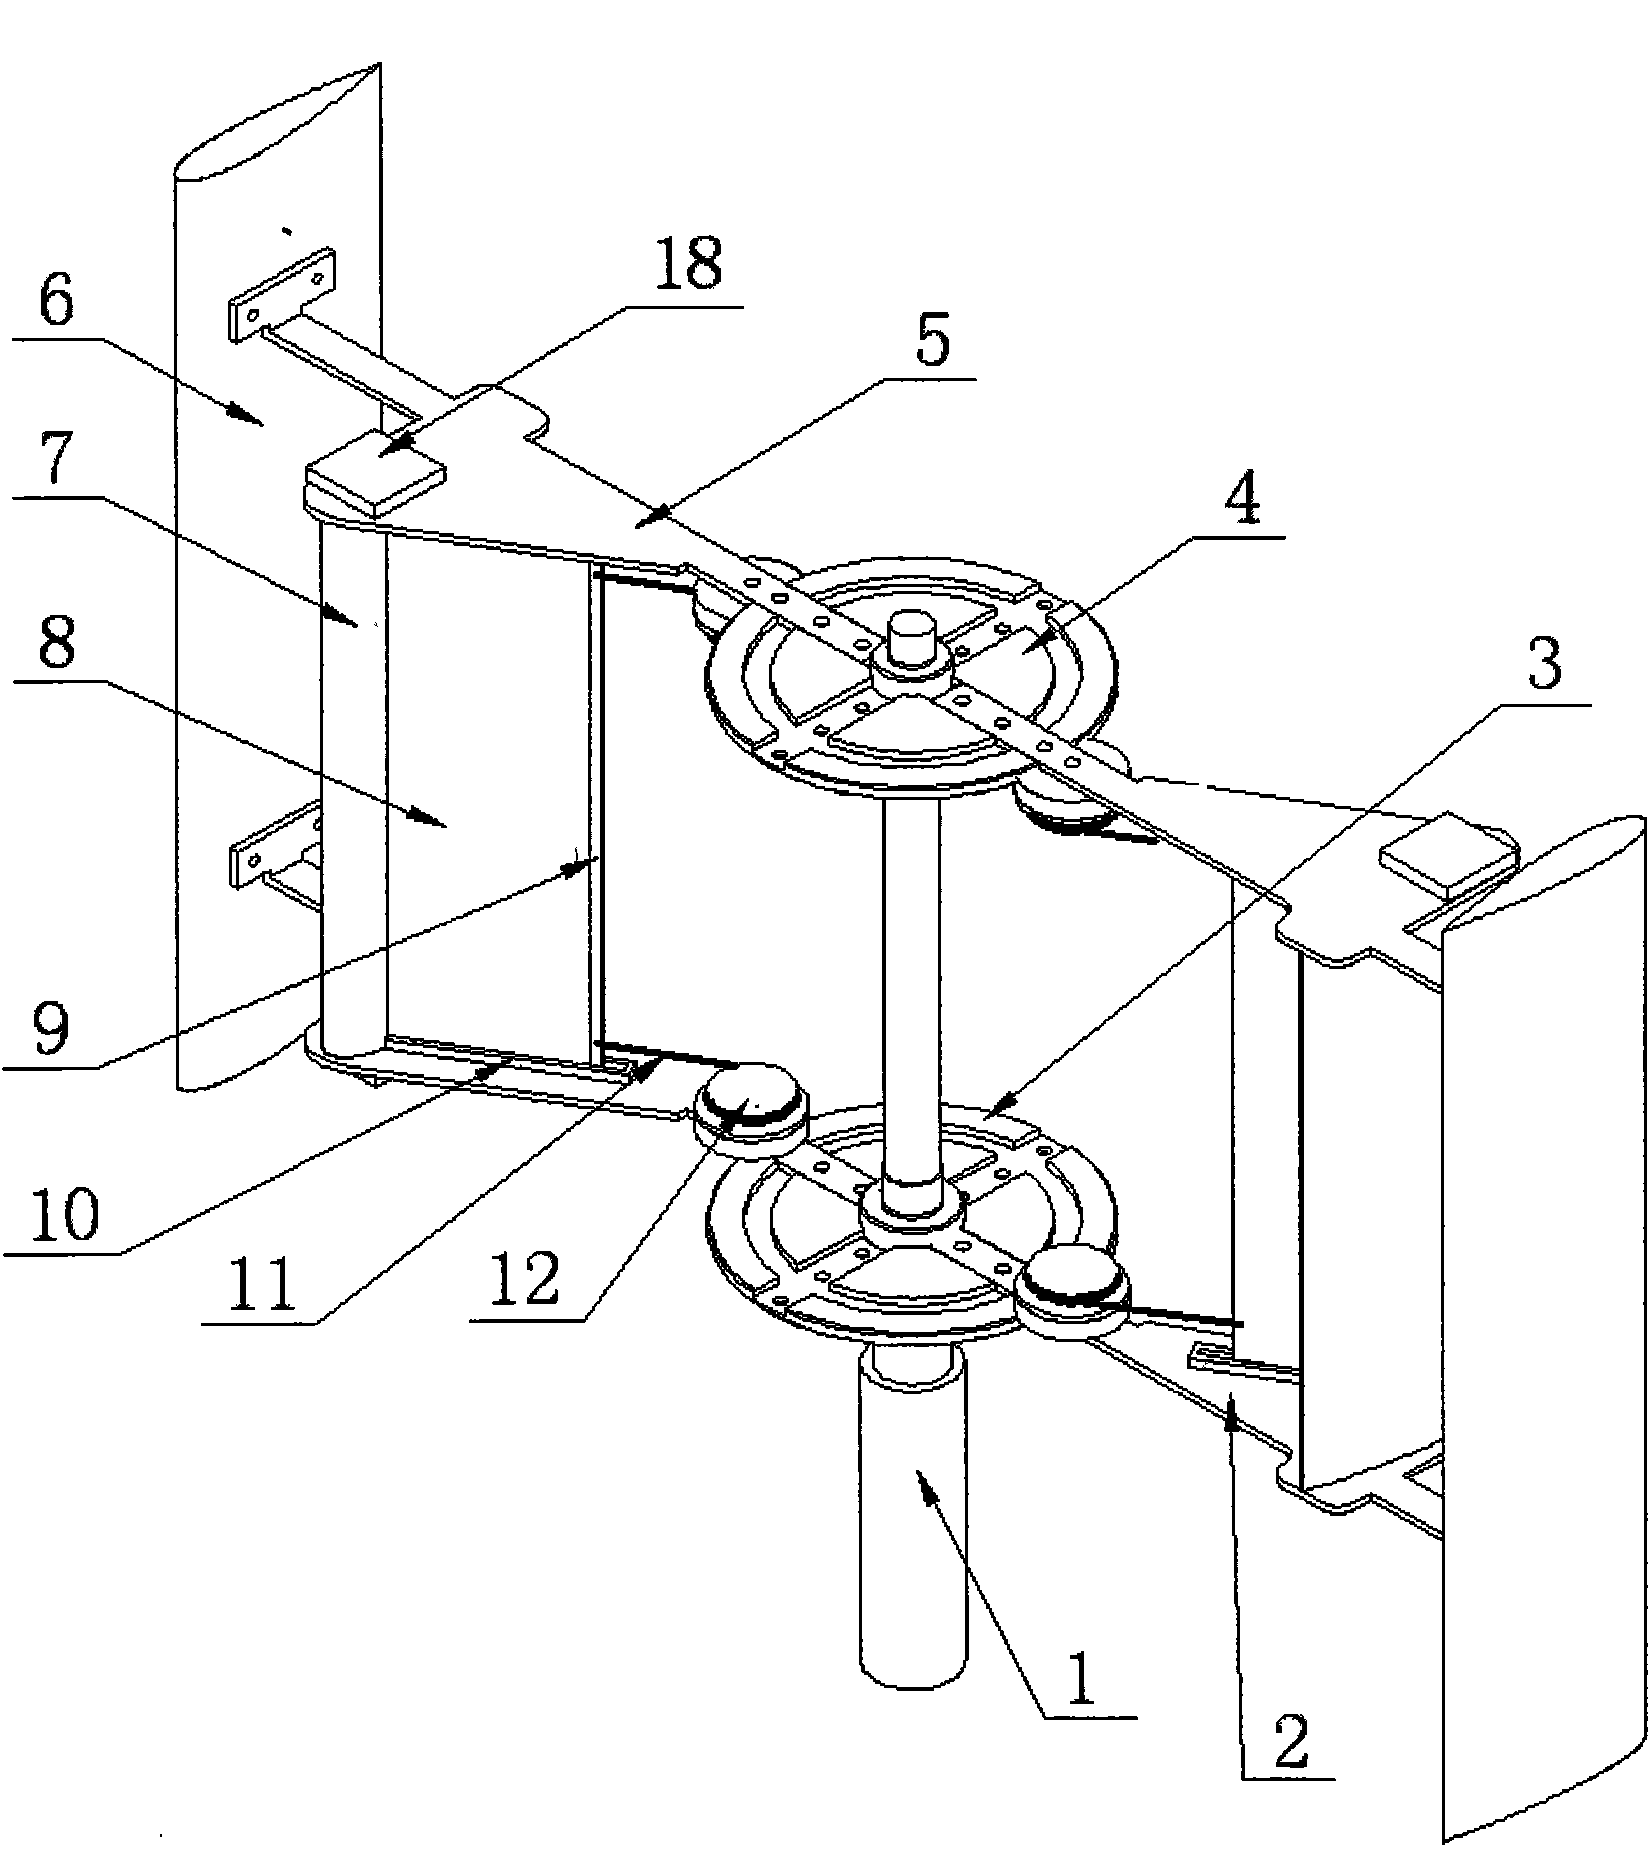 Flexible and retractable auxiliary blade mechanism of vertical-axis wind turbine